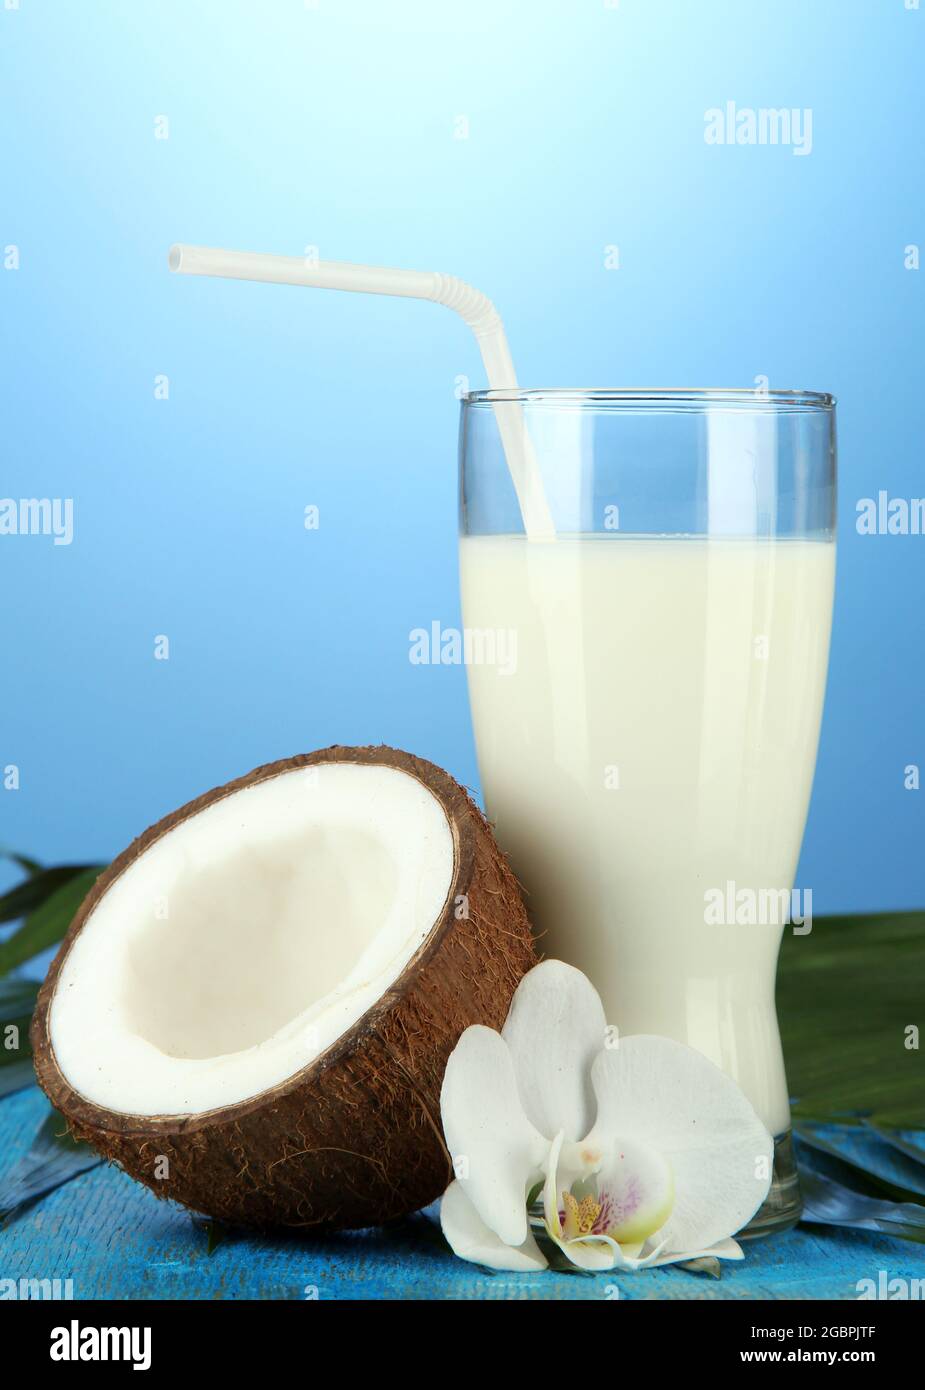 Coconut with glass of milk, on blue background Stock Photo - Alamy